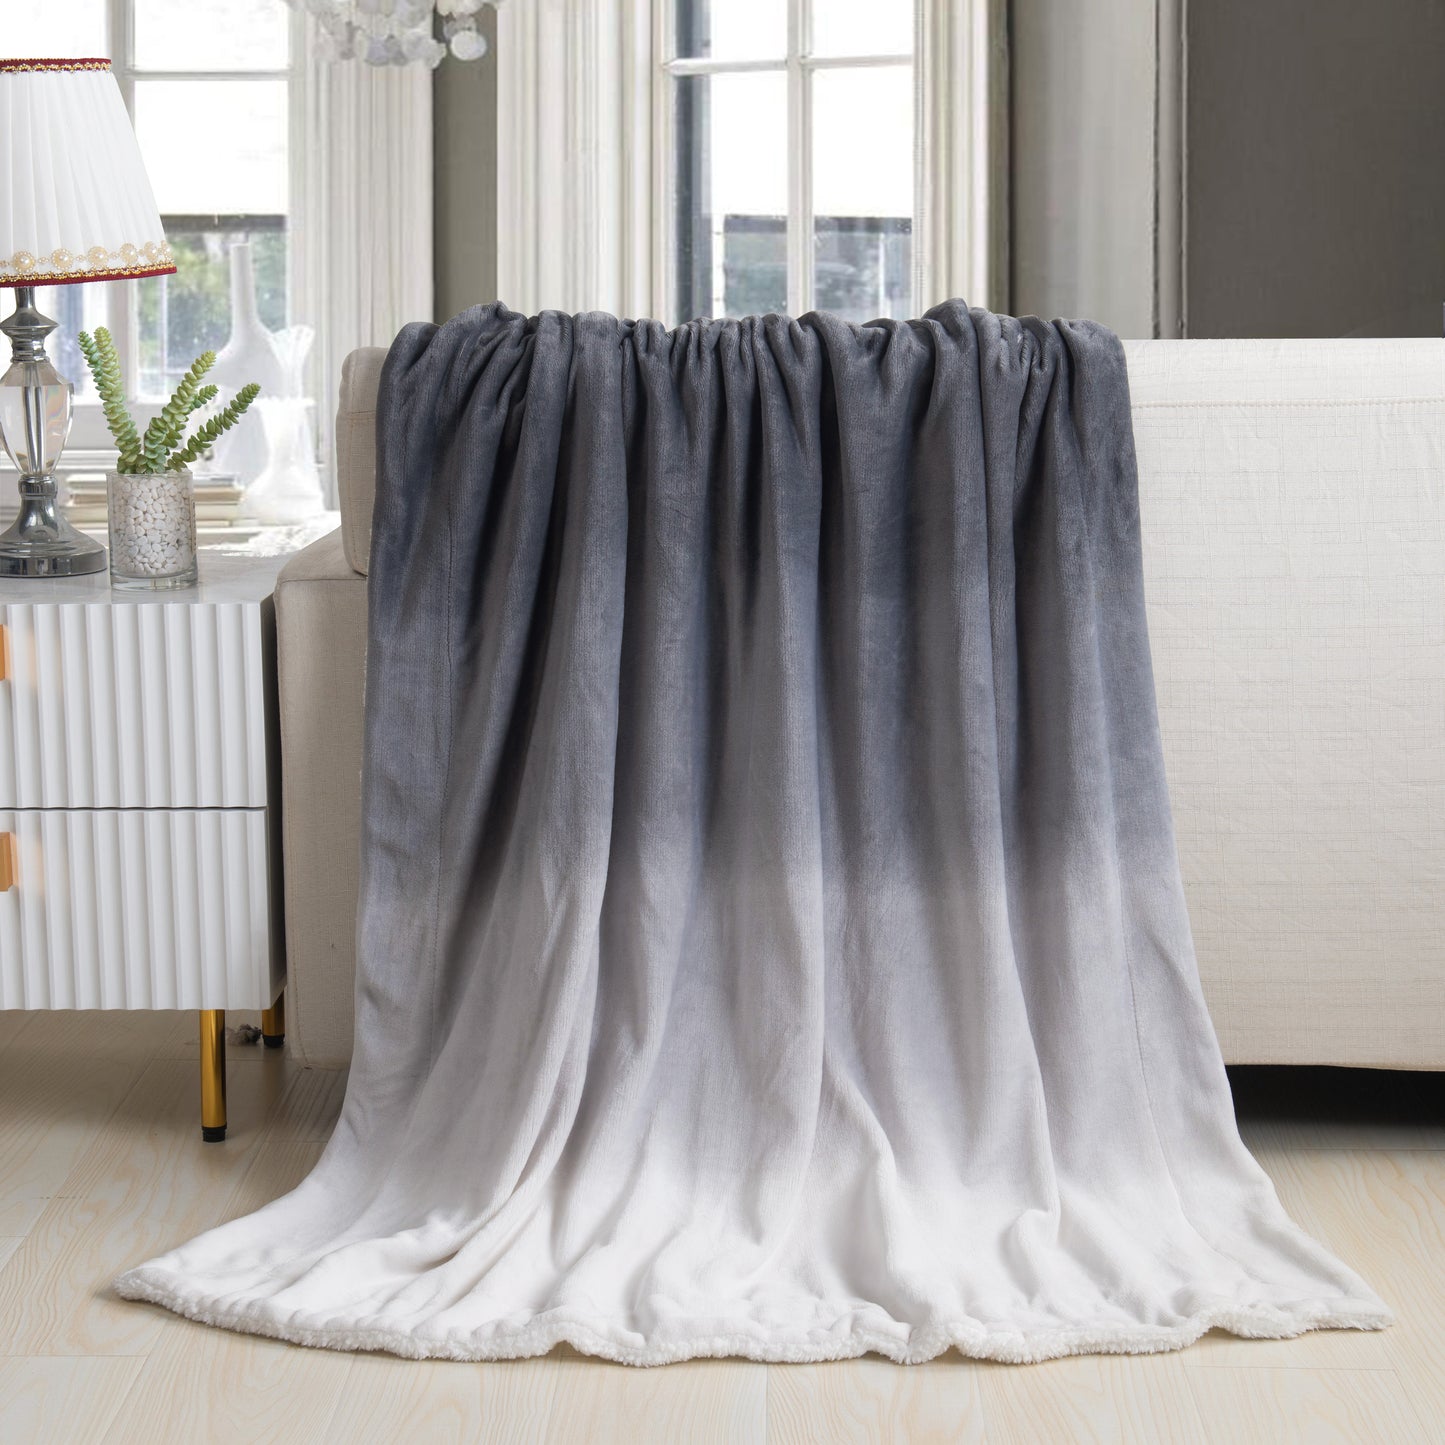 Elegant Comfort Ombre Printed - Sherpa Backed Plush Throw Blankets - 50 x 60 inches